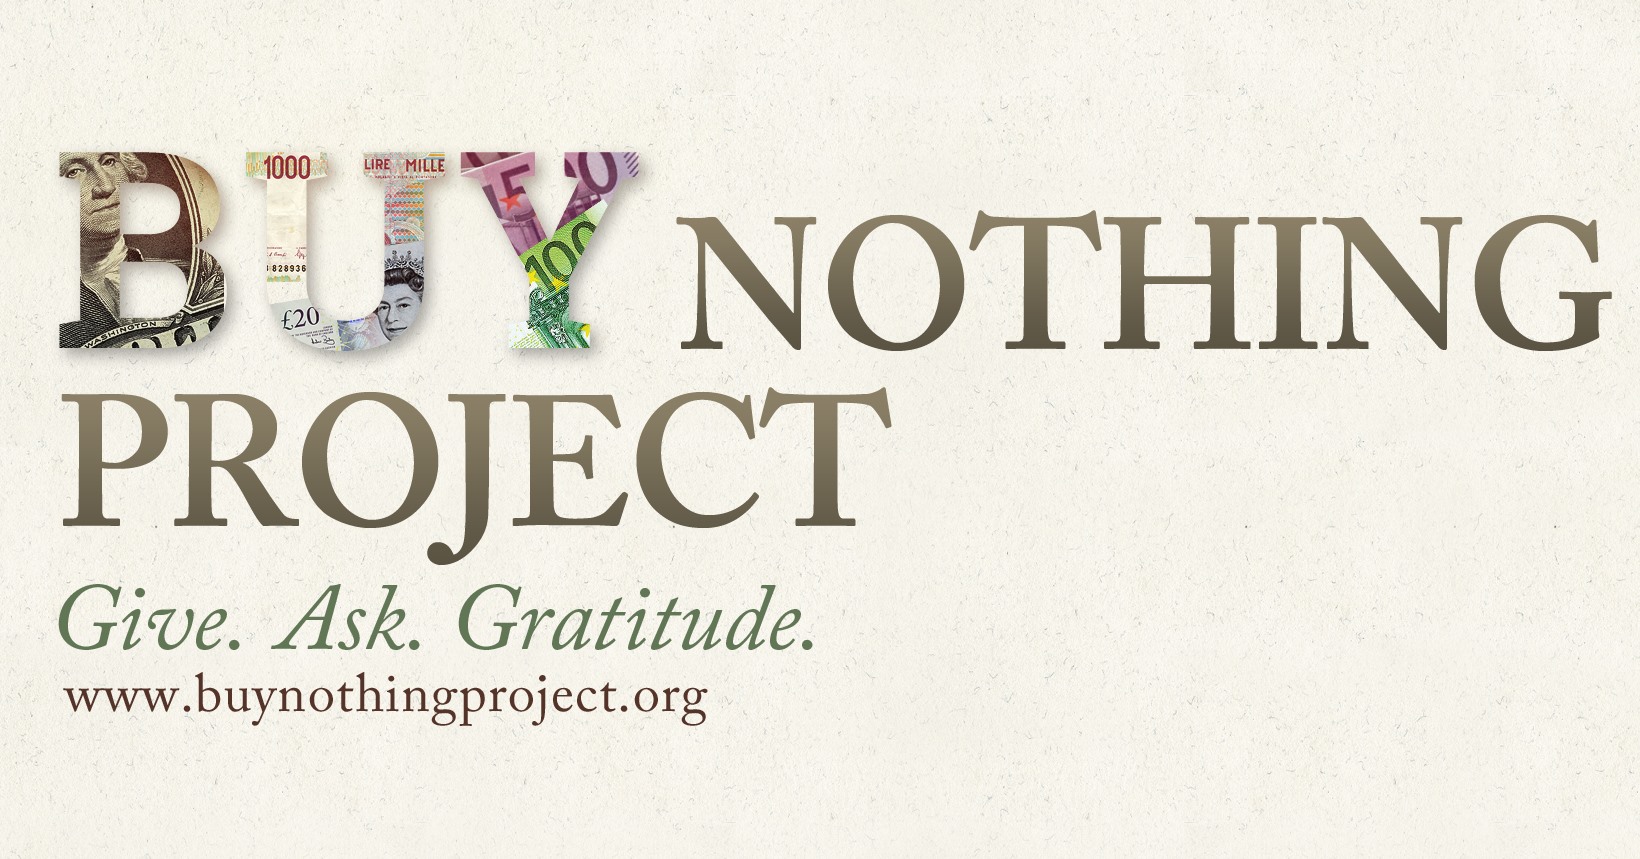 The logo for the Buy Nothing Project with the slogan, "Give. Ask. Gratitude."